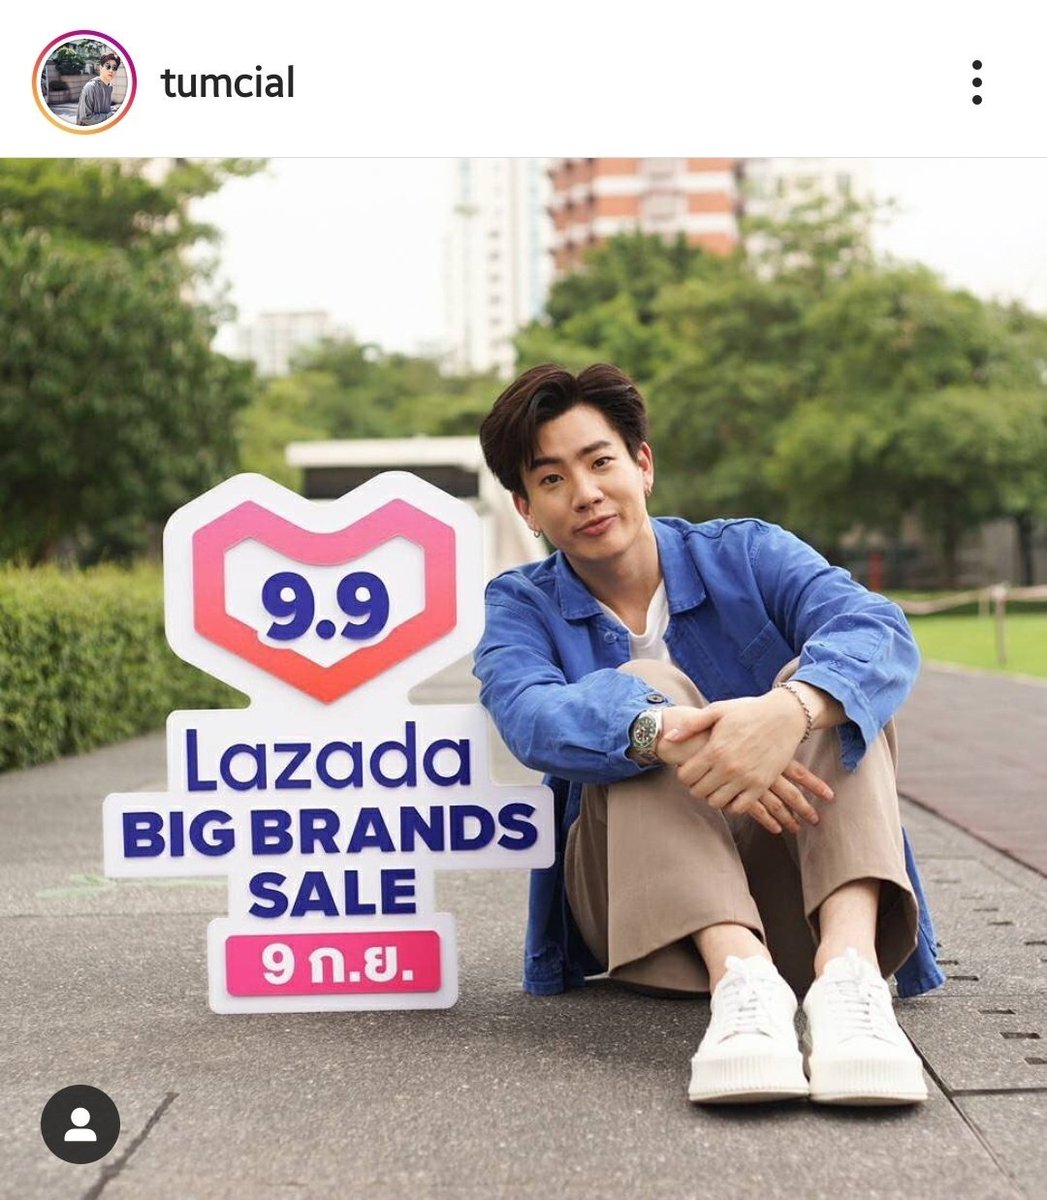 No one knows this happened on the same day. Shh. We did not see anything.  #Lazada99LivexOff #Lazada99LivexTay  #ชาวบ้าน  #Tawan_V #ออฟจุมพล  #ออฟกัน